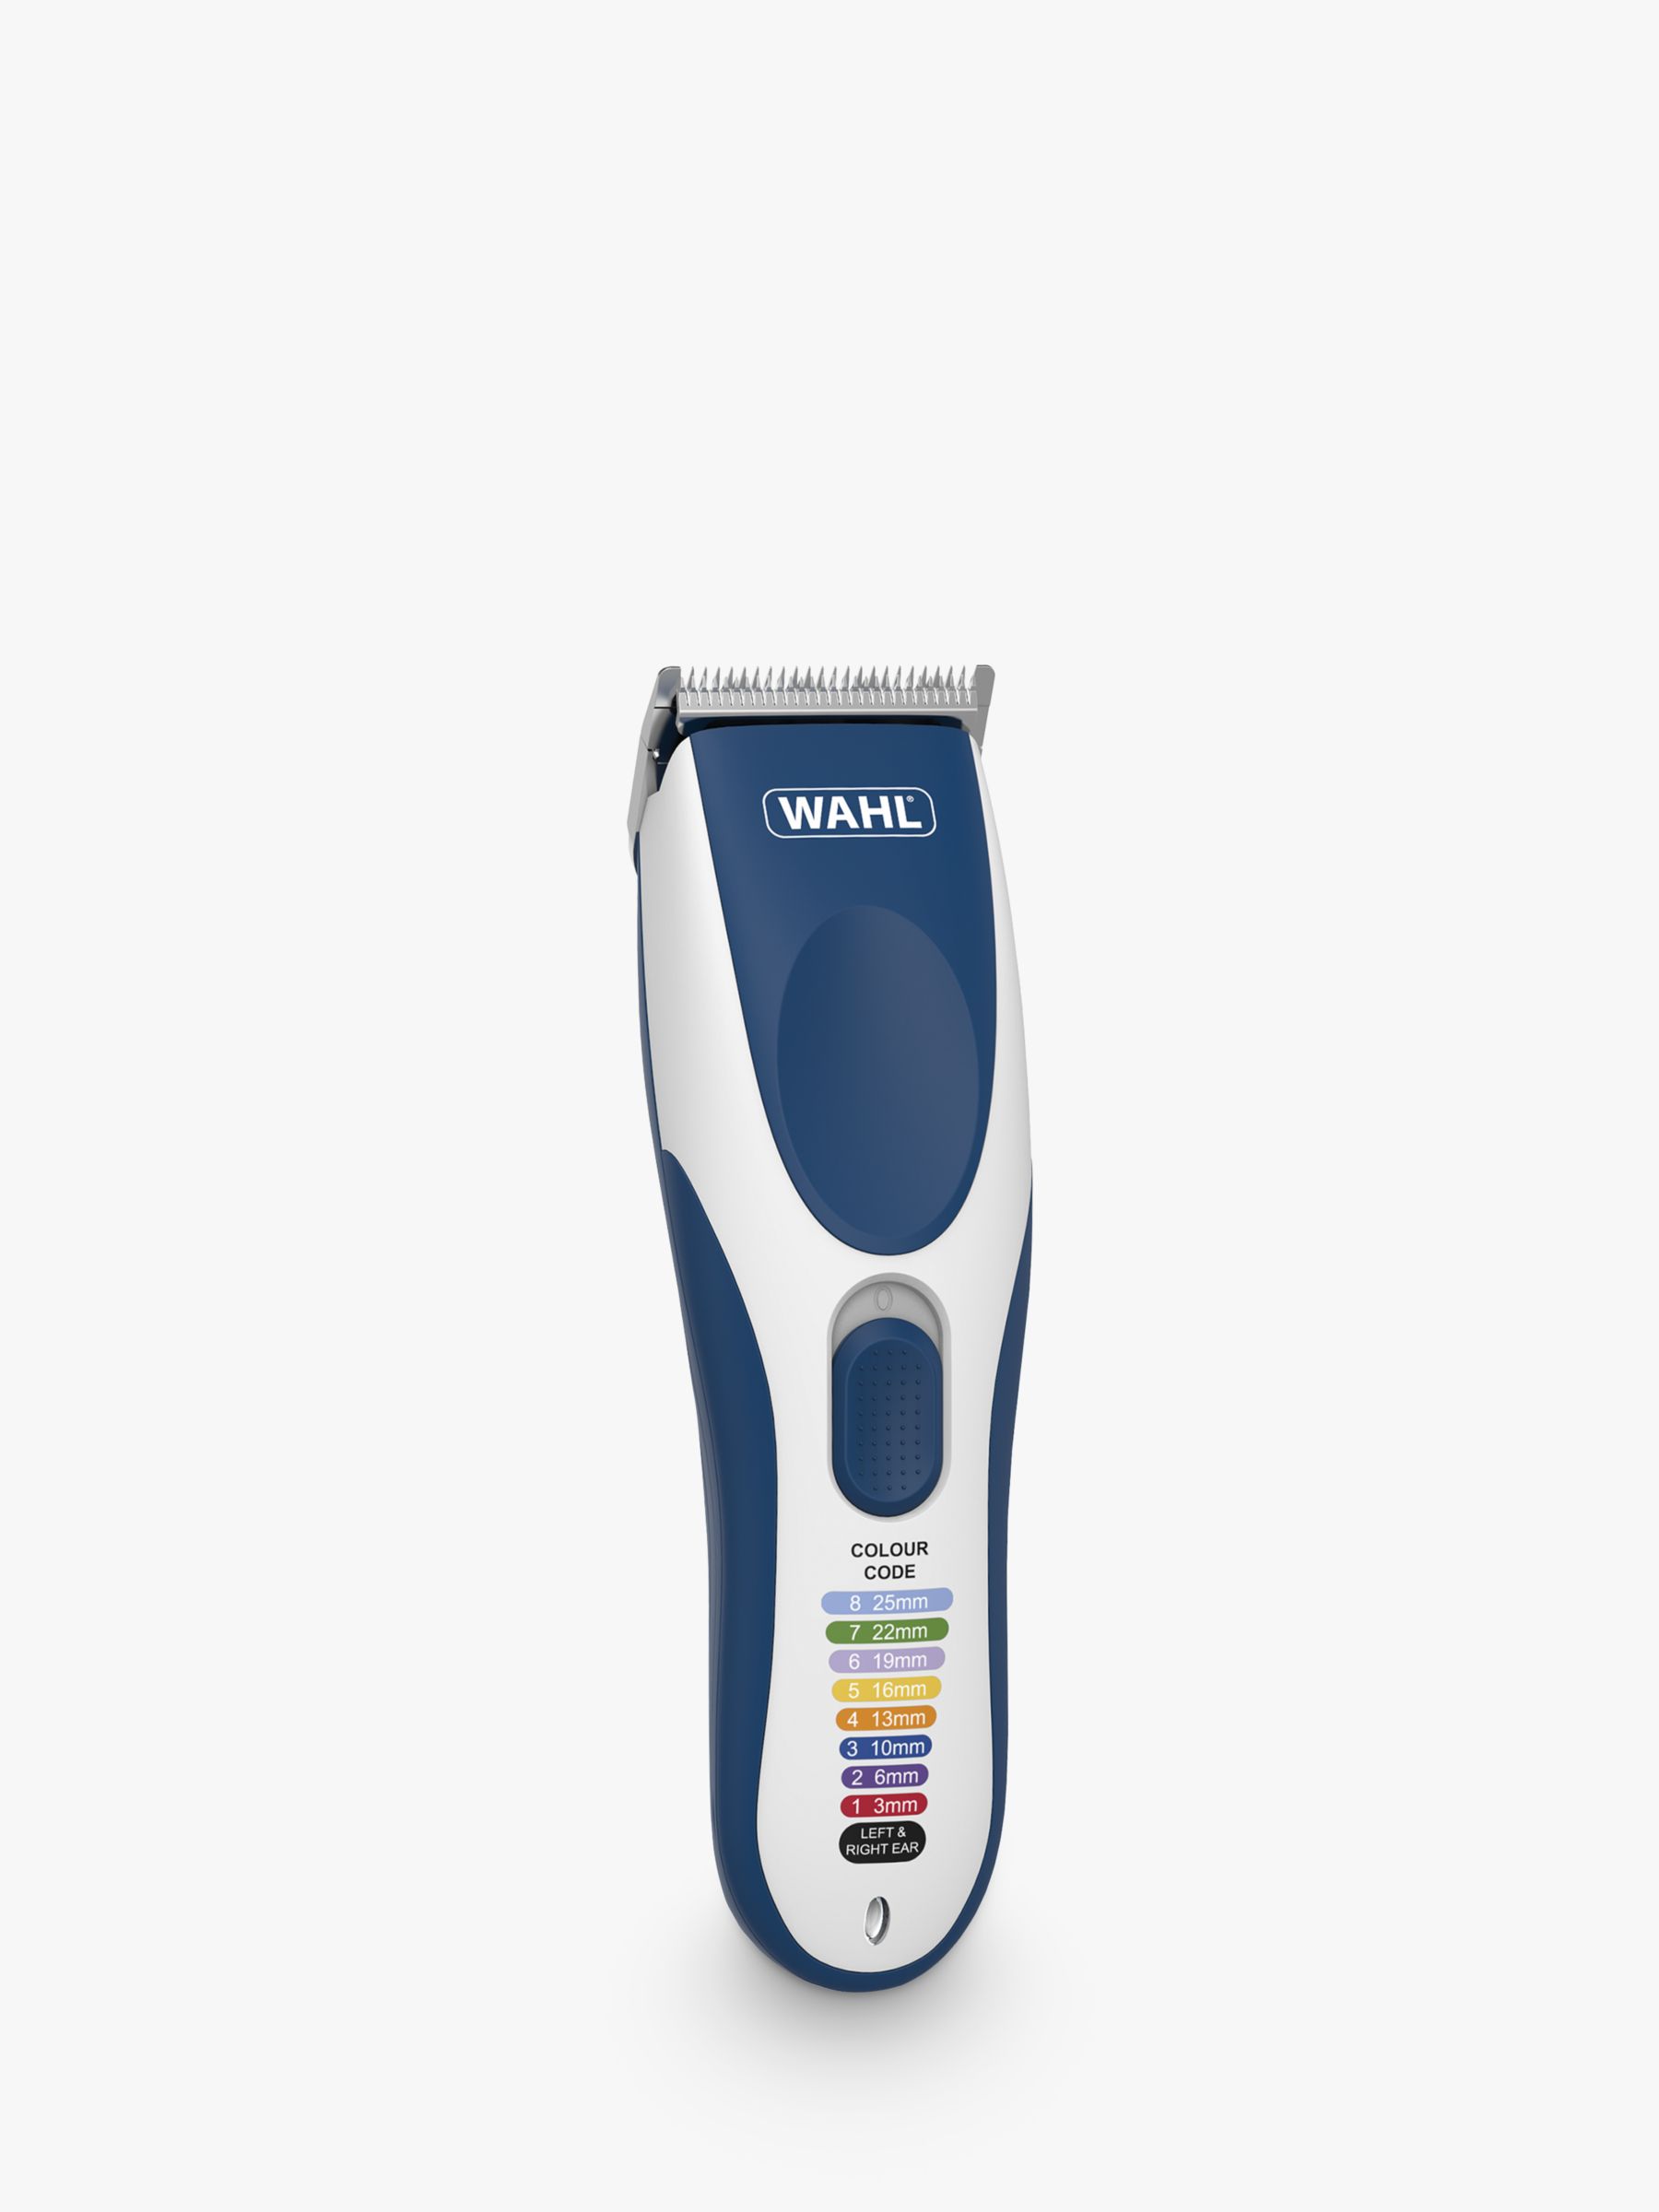 wahl colour pro styler hair clipper cordless